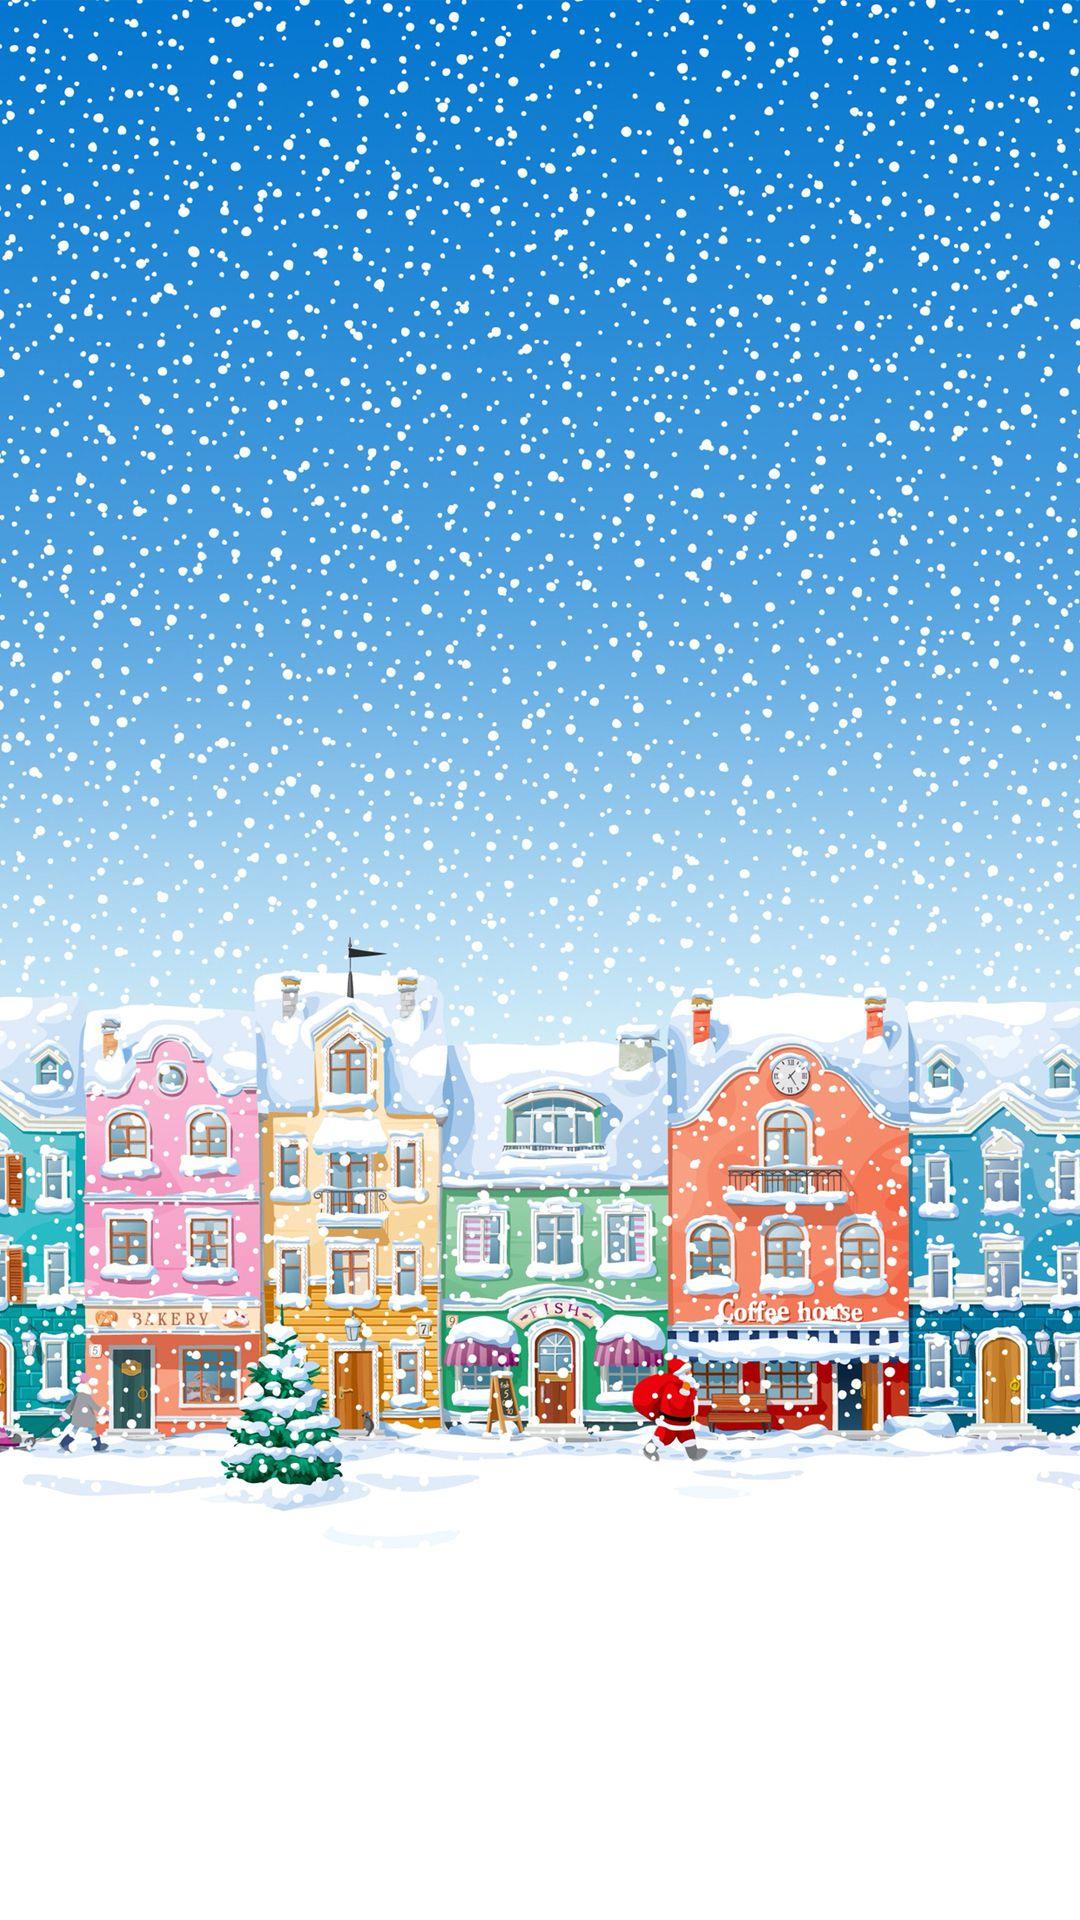 Snowy Town Santa Claus Delivering Christmas Presents iPhone 6 Wallpaper Download. iPh. Wallpaper iphone christmas, Christmas phone wallpaper, Christmas wallpaper